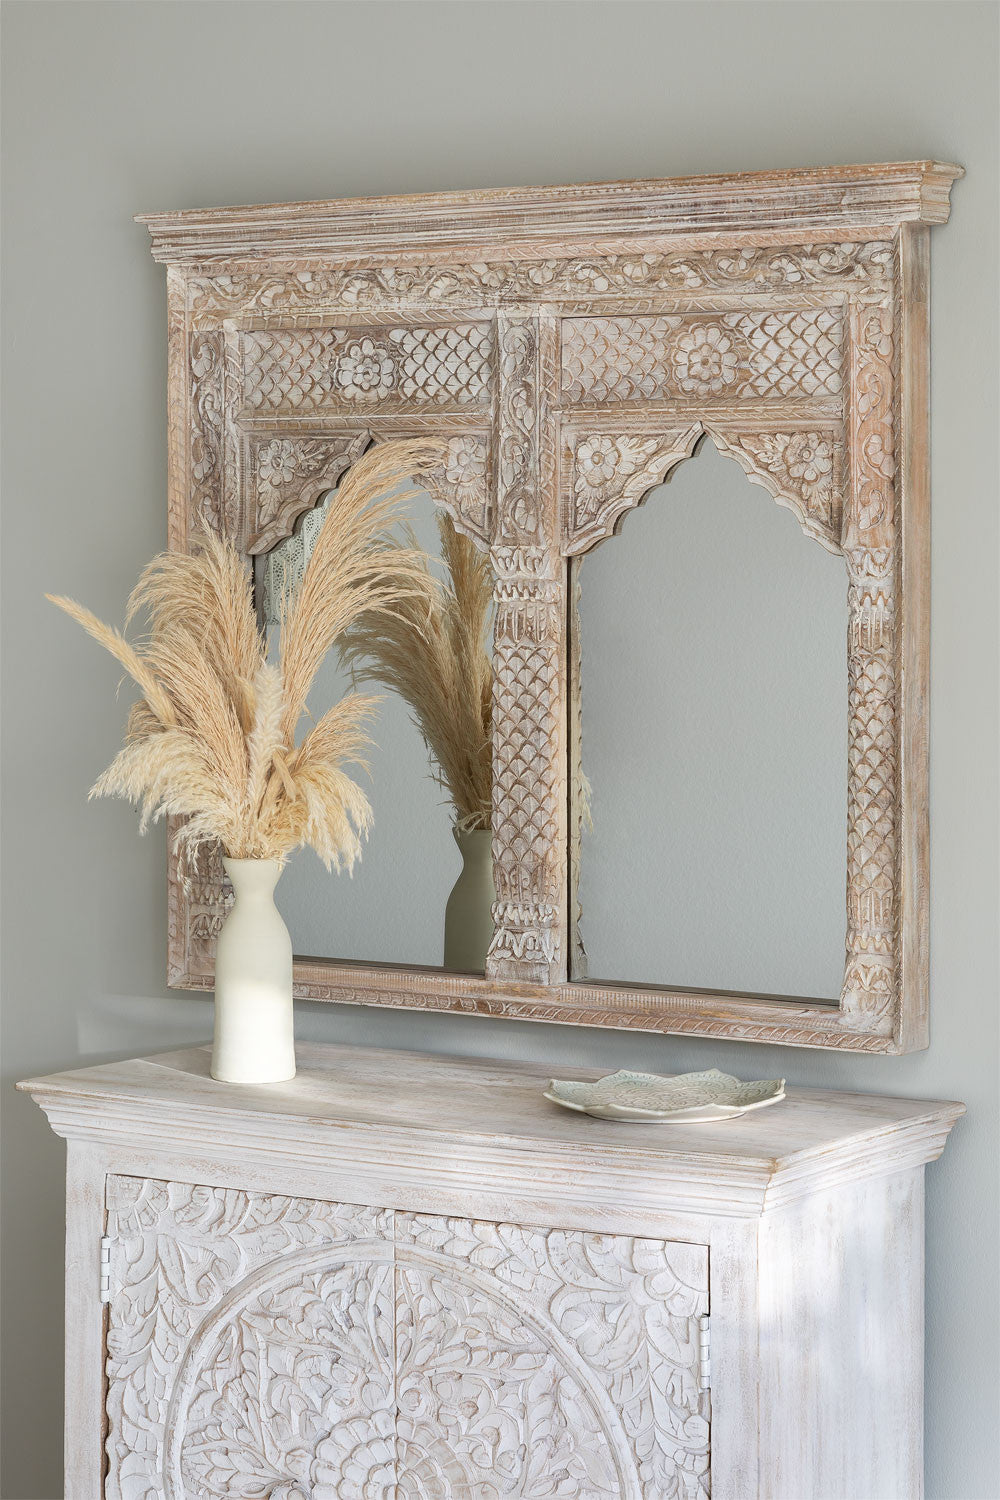 Indian Style Double Wall Mirror Jharokha Hand Carved Wall Mirror in Solid Hard Wood | Vinatge | Rustic | Living Room Antique Wall Decor